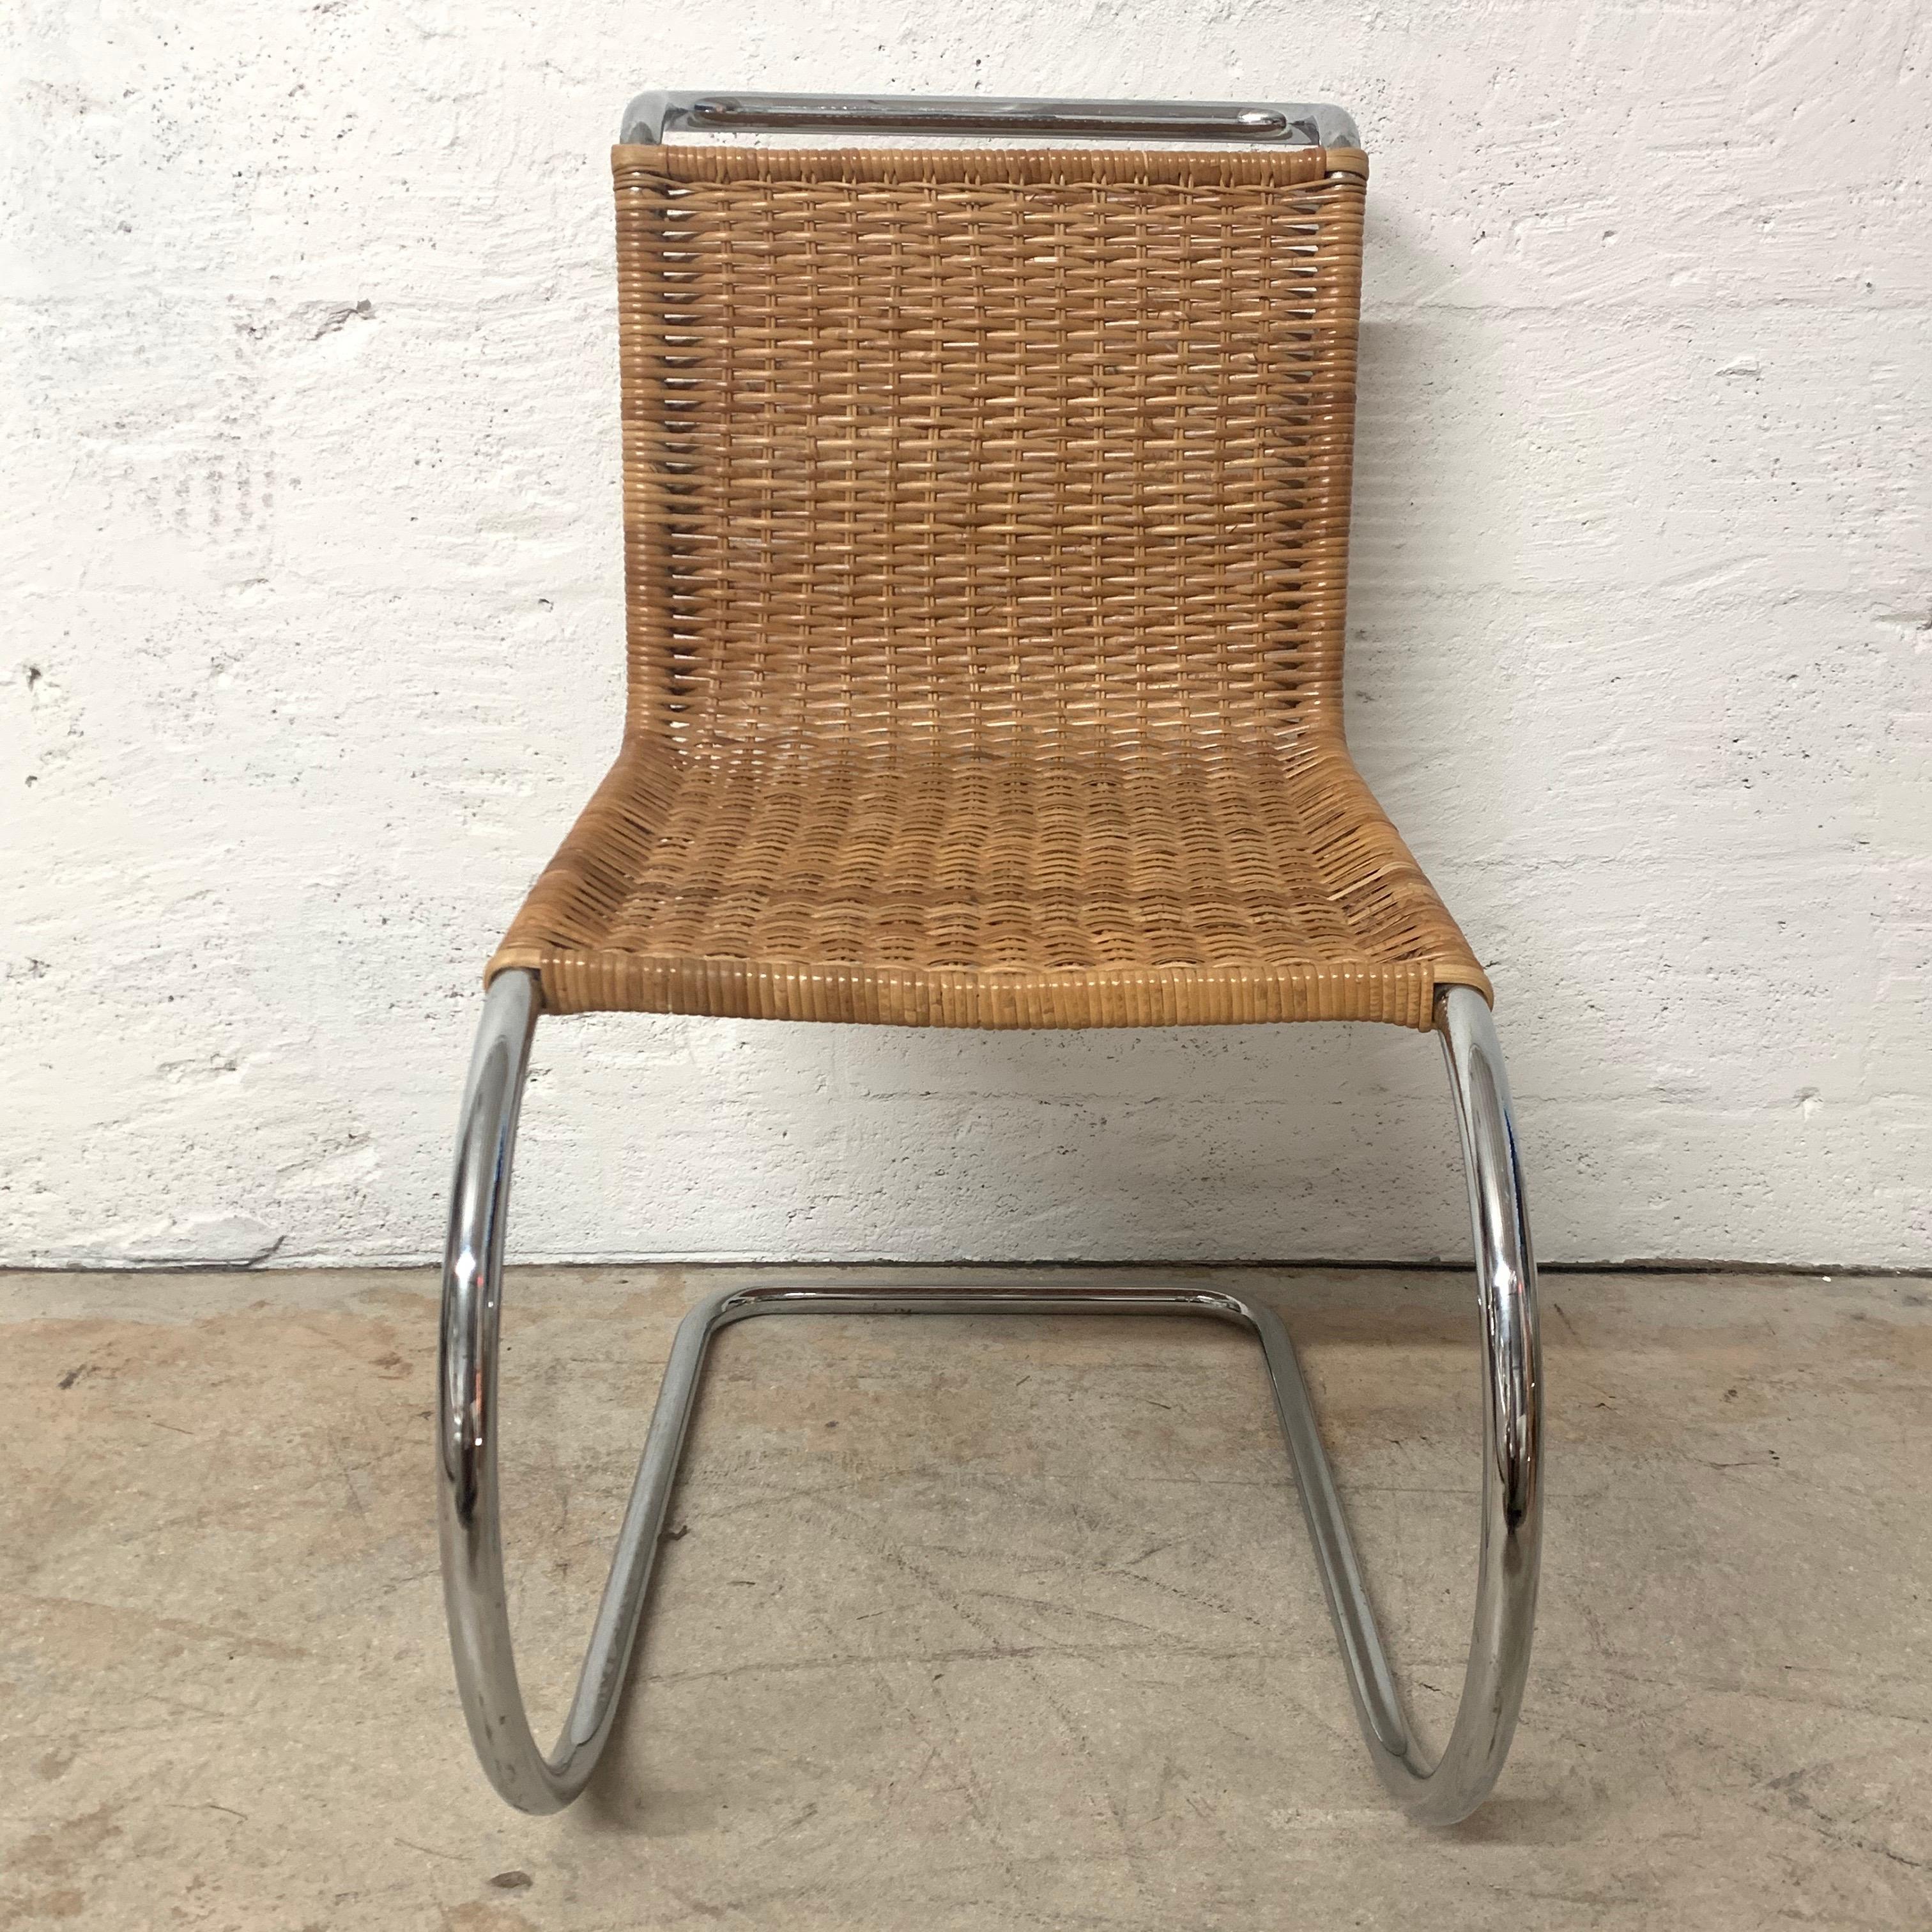 Early MR 10 side chair rendered in chrome-plated steel frame with woven cane wicker seat designed by Mies Van Der Rohe, produced in Italy, 1950s.